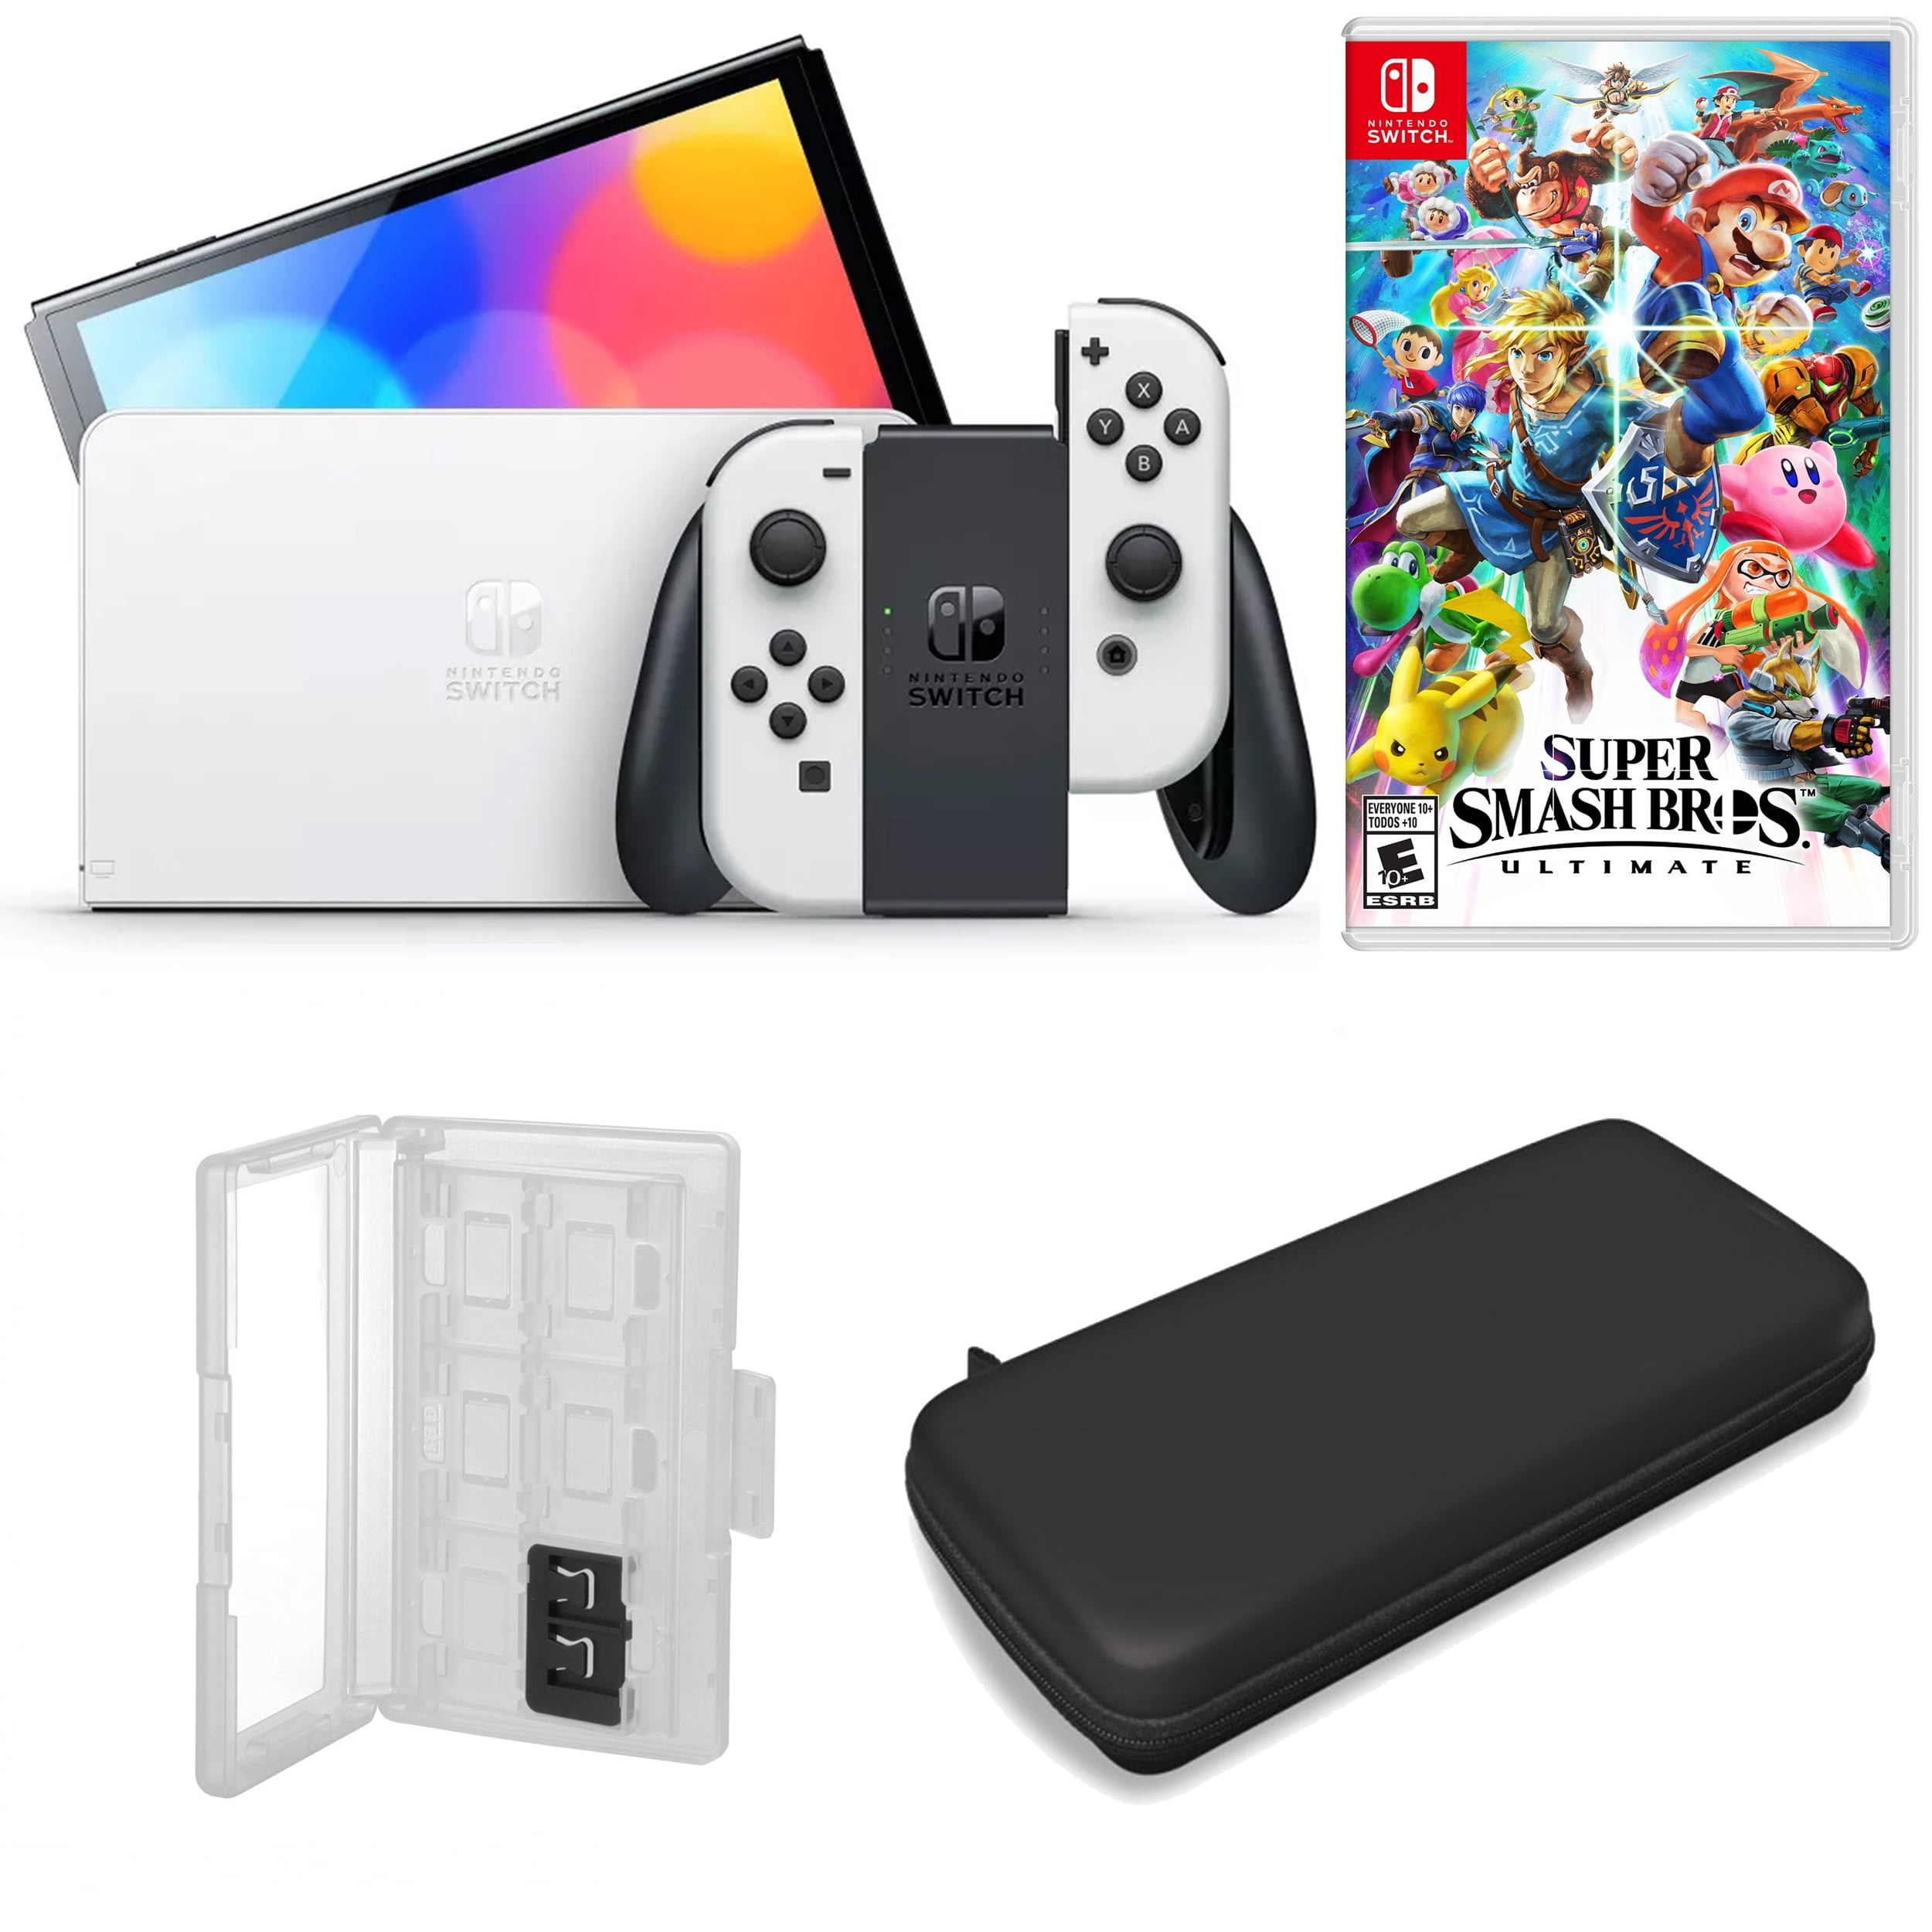 Nintendo Switch OLED in White with Super Smash Bros 3 and Accessories 